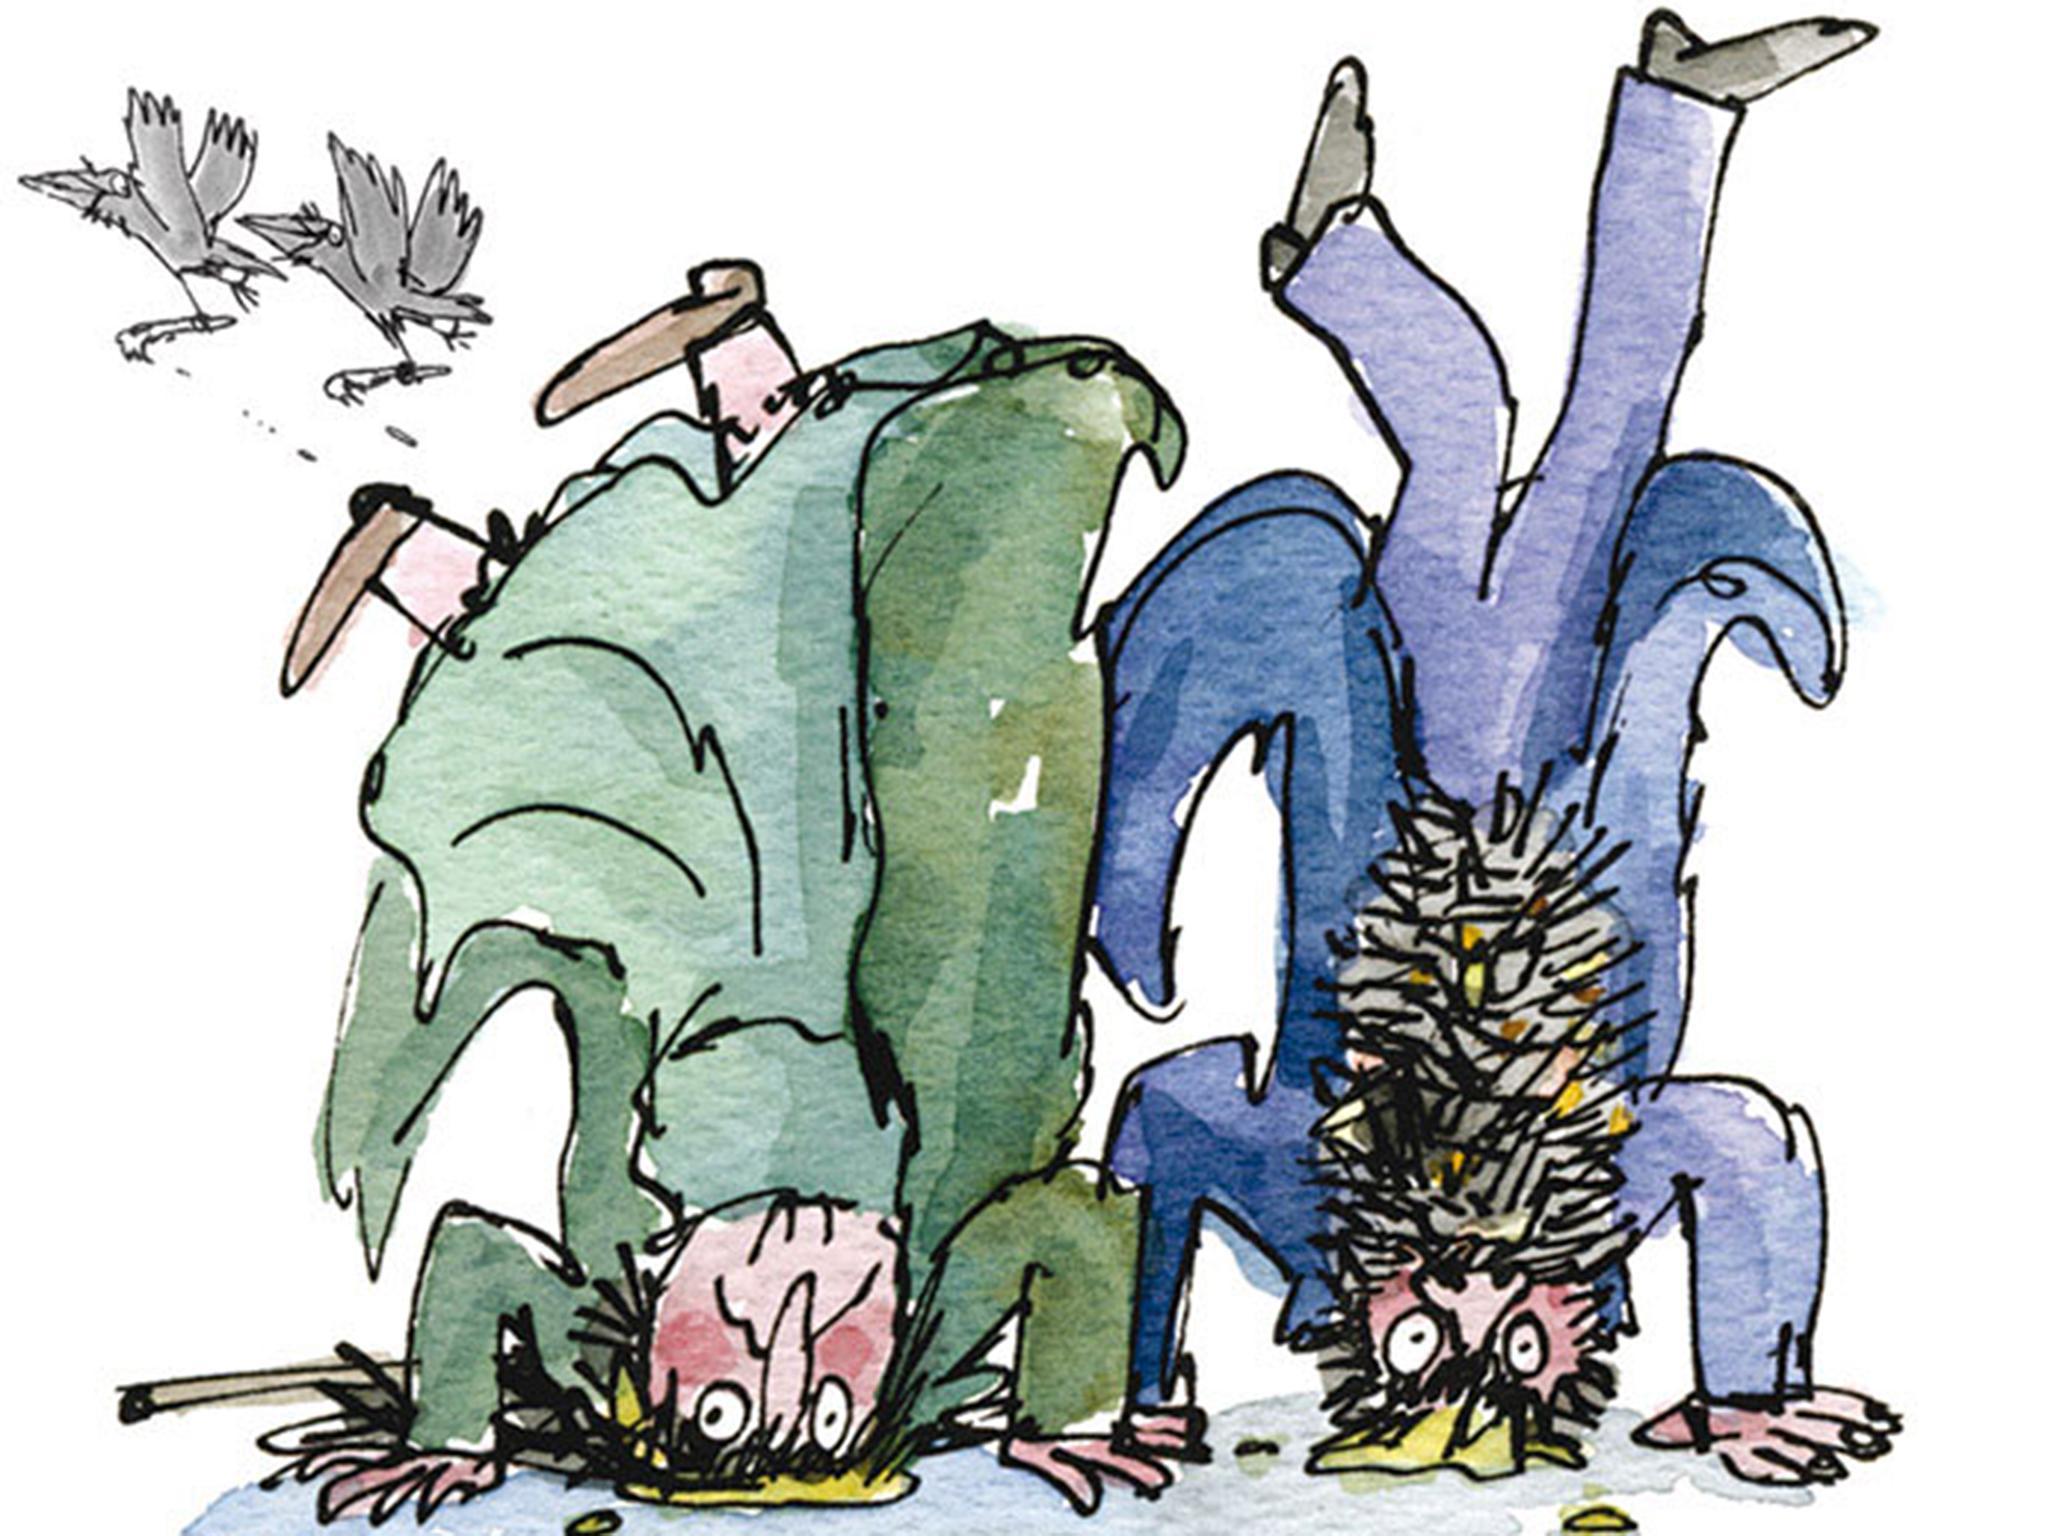 Mugwumps appear in Roald Dahl's The Twits, but the connection to Jeremy Corbyn isn't immediately obvious